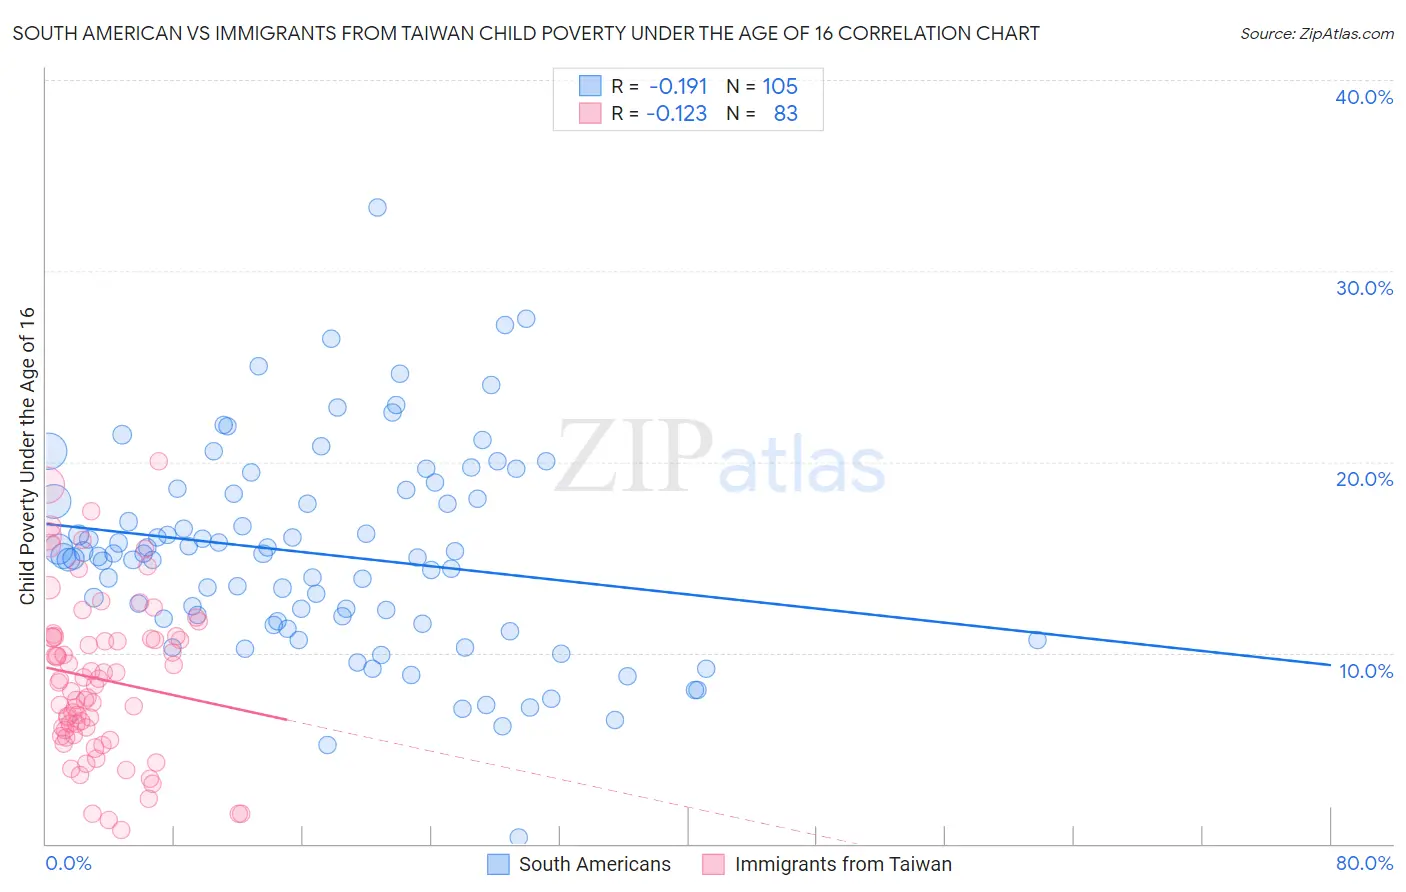 South American vs Immigrants from Taiwan Child Poverty Under the Age of 16